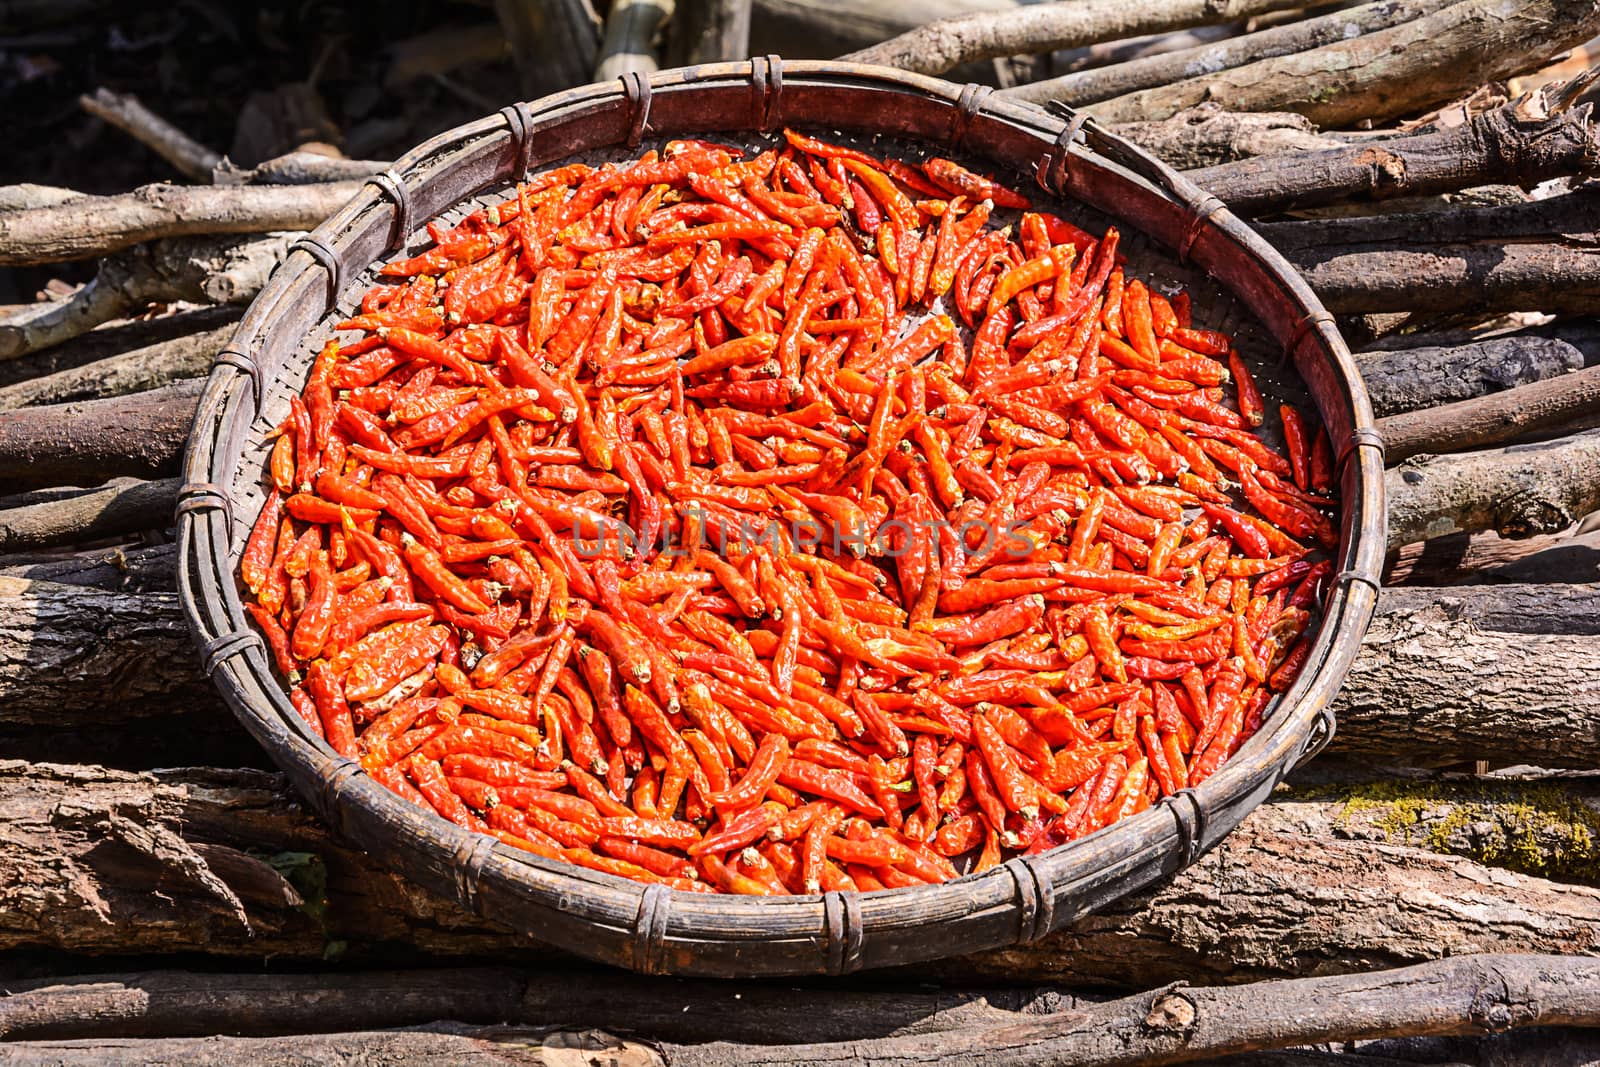 Chili dried in the bamboo basket by NuwatPhoto